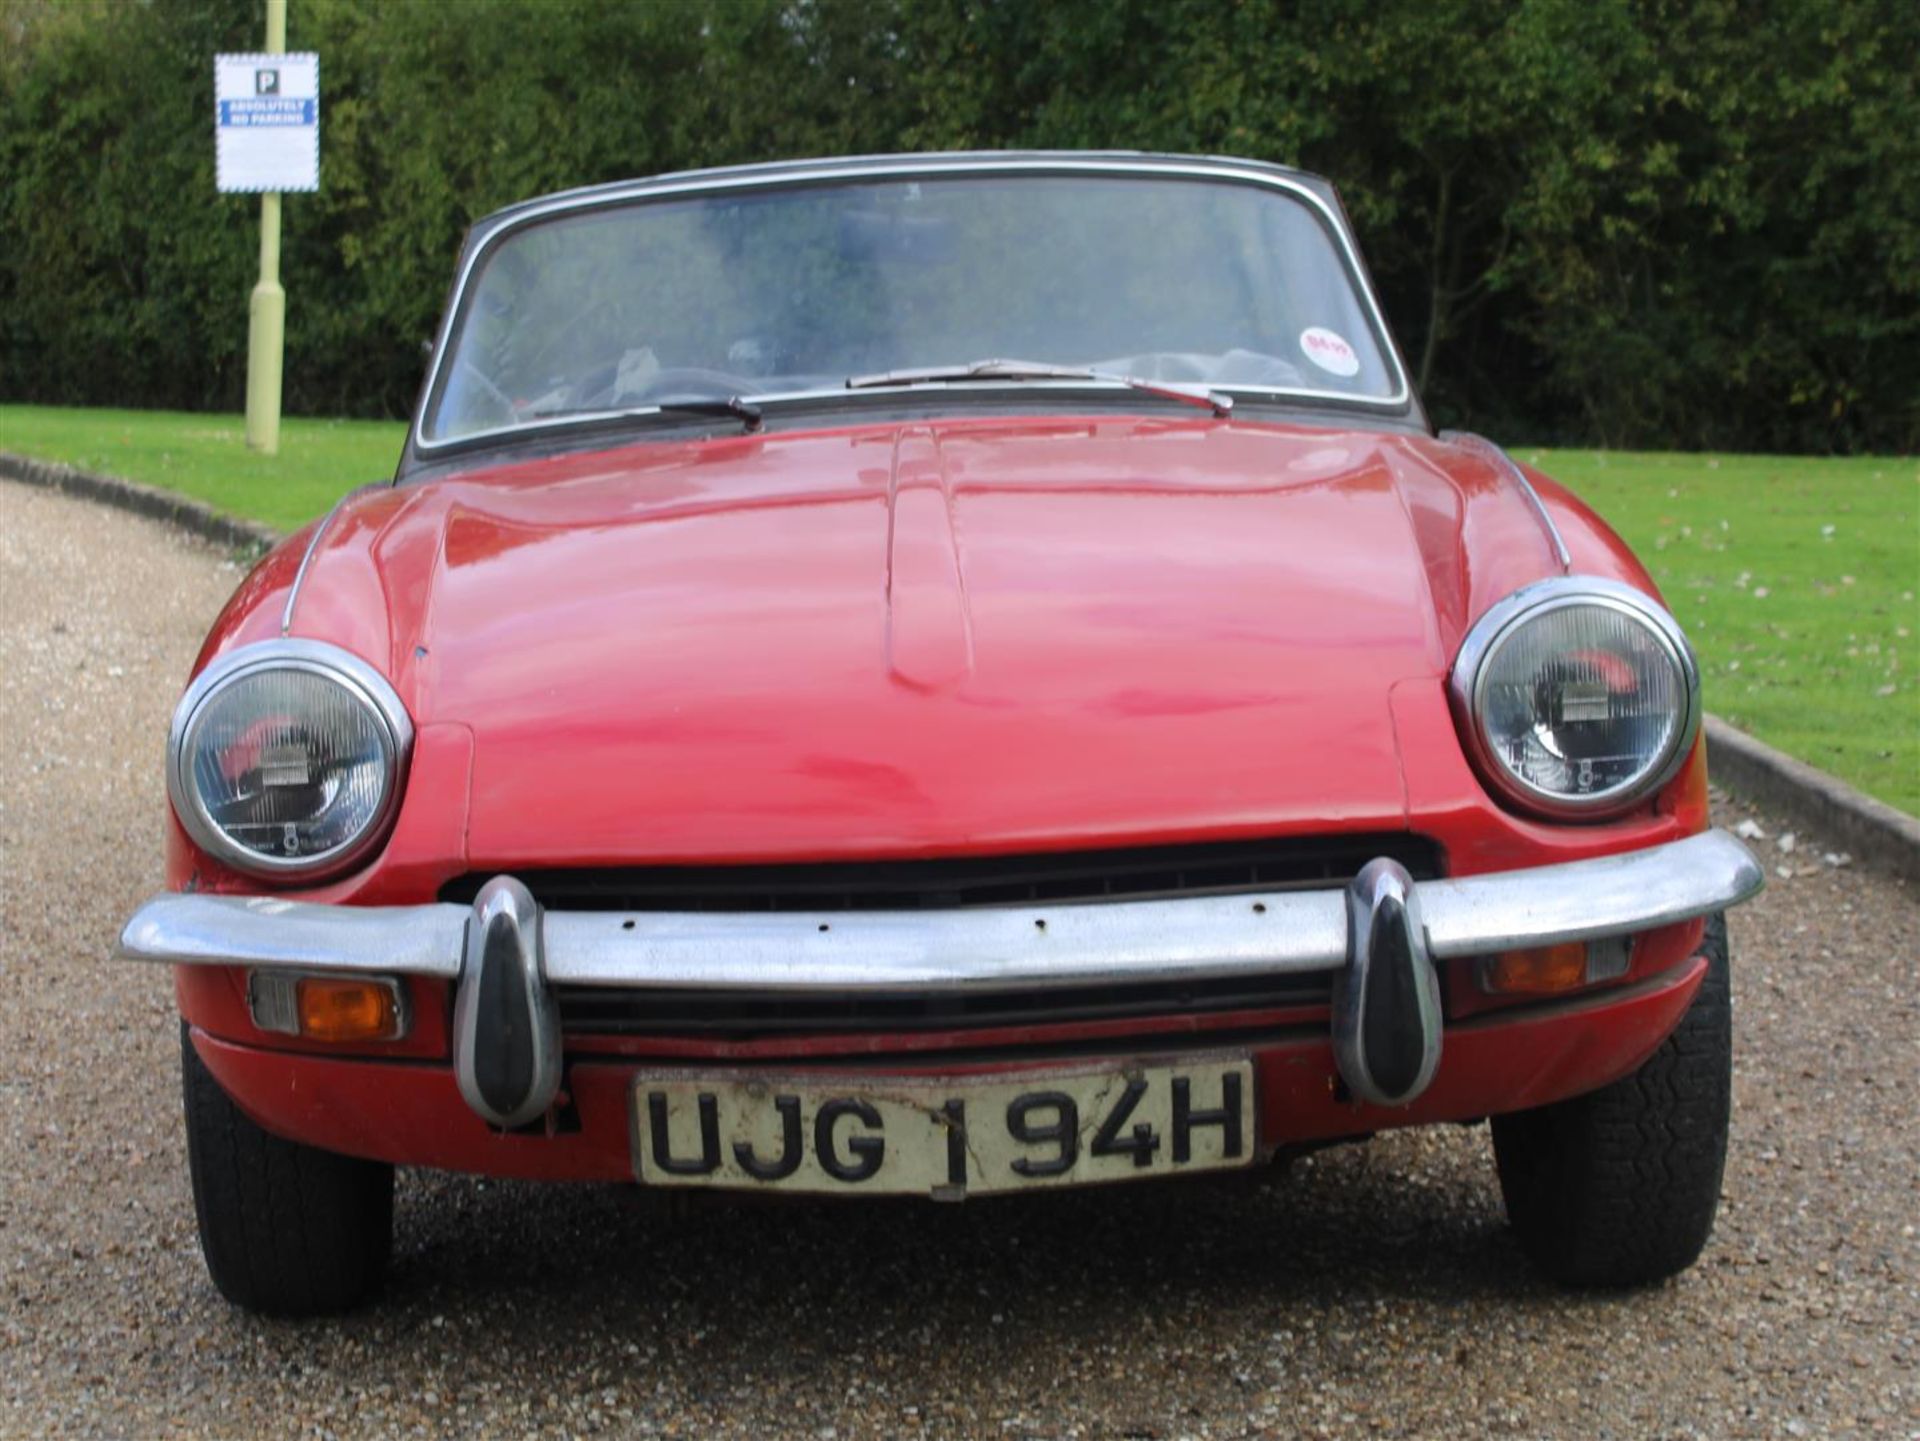 1970 Triumph Spitfire MKIII - Image 6 of 15